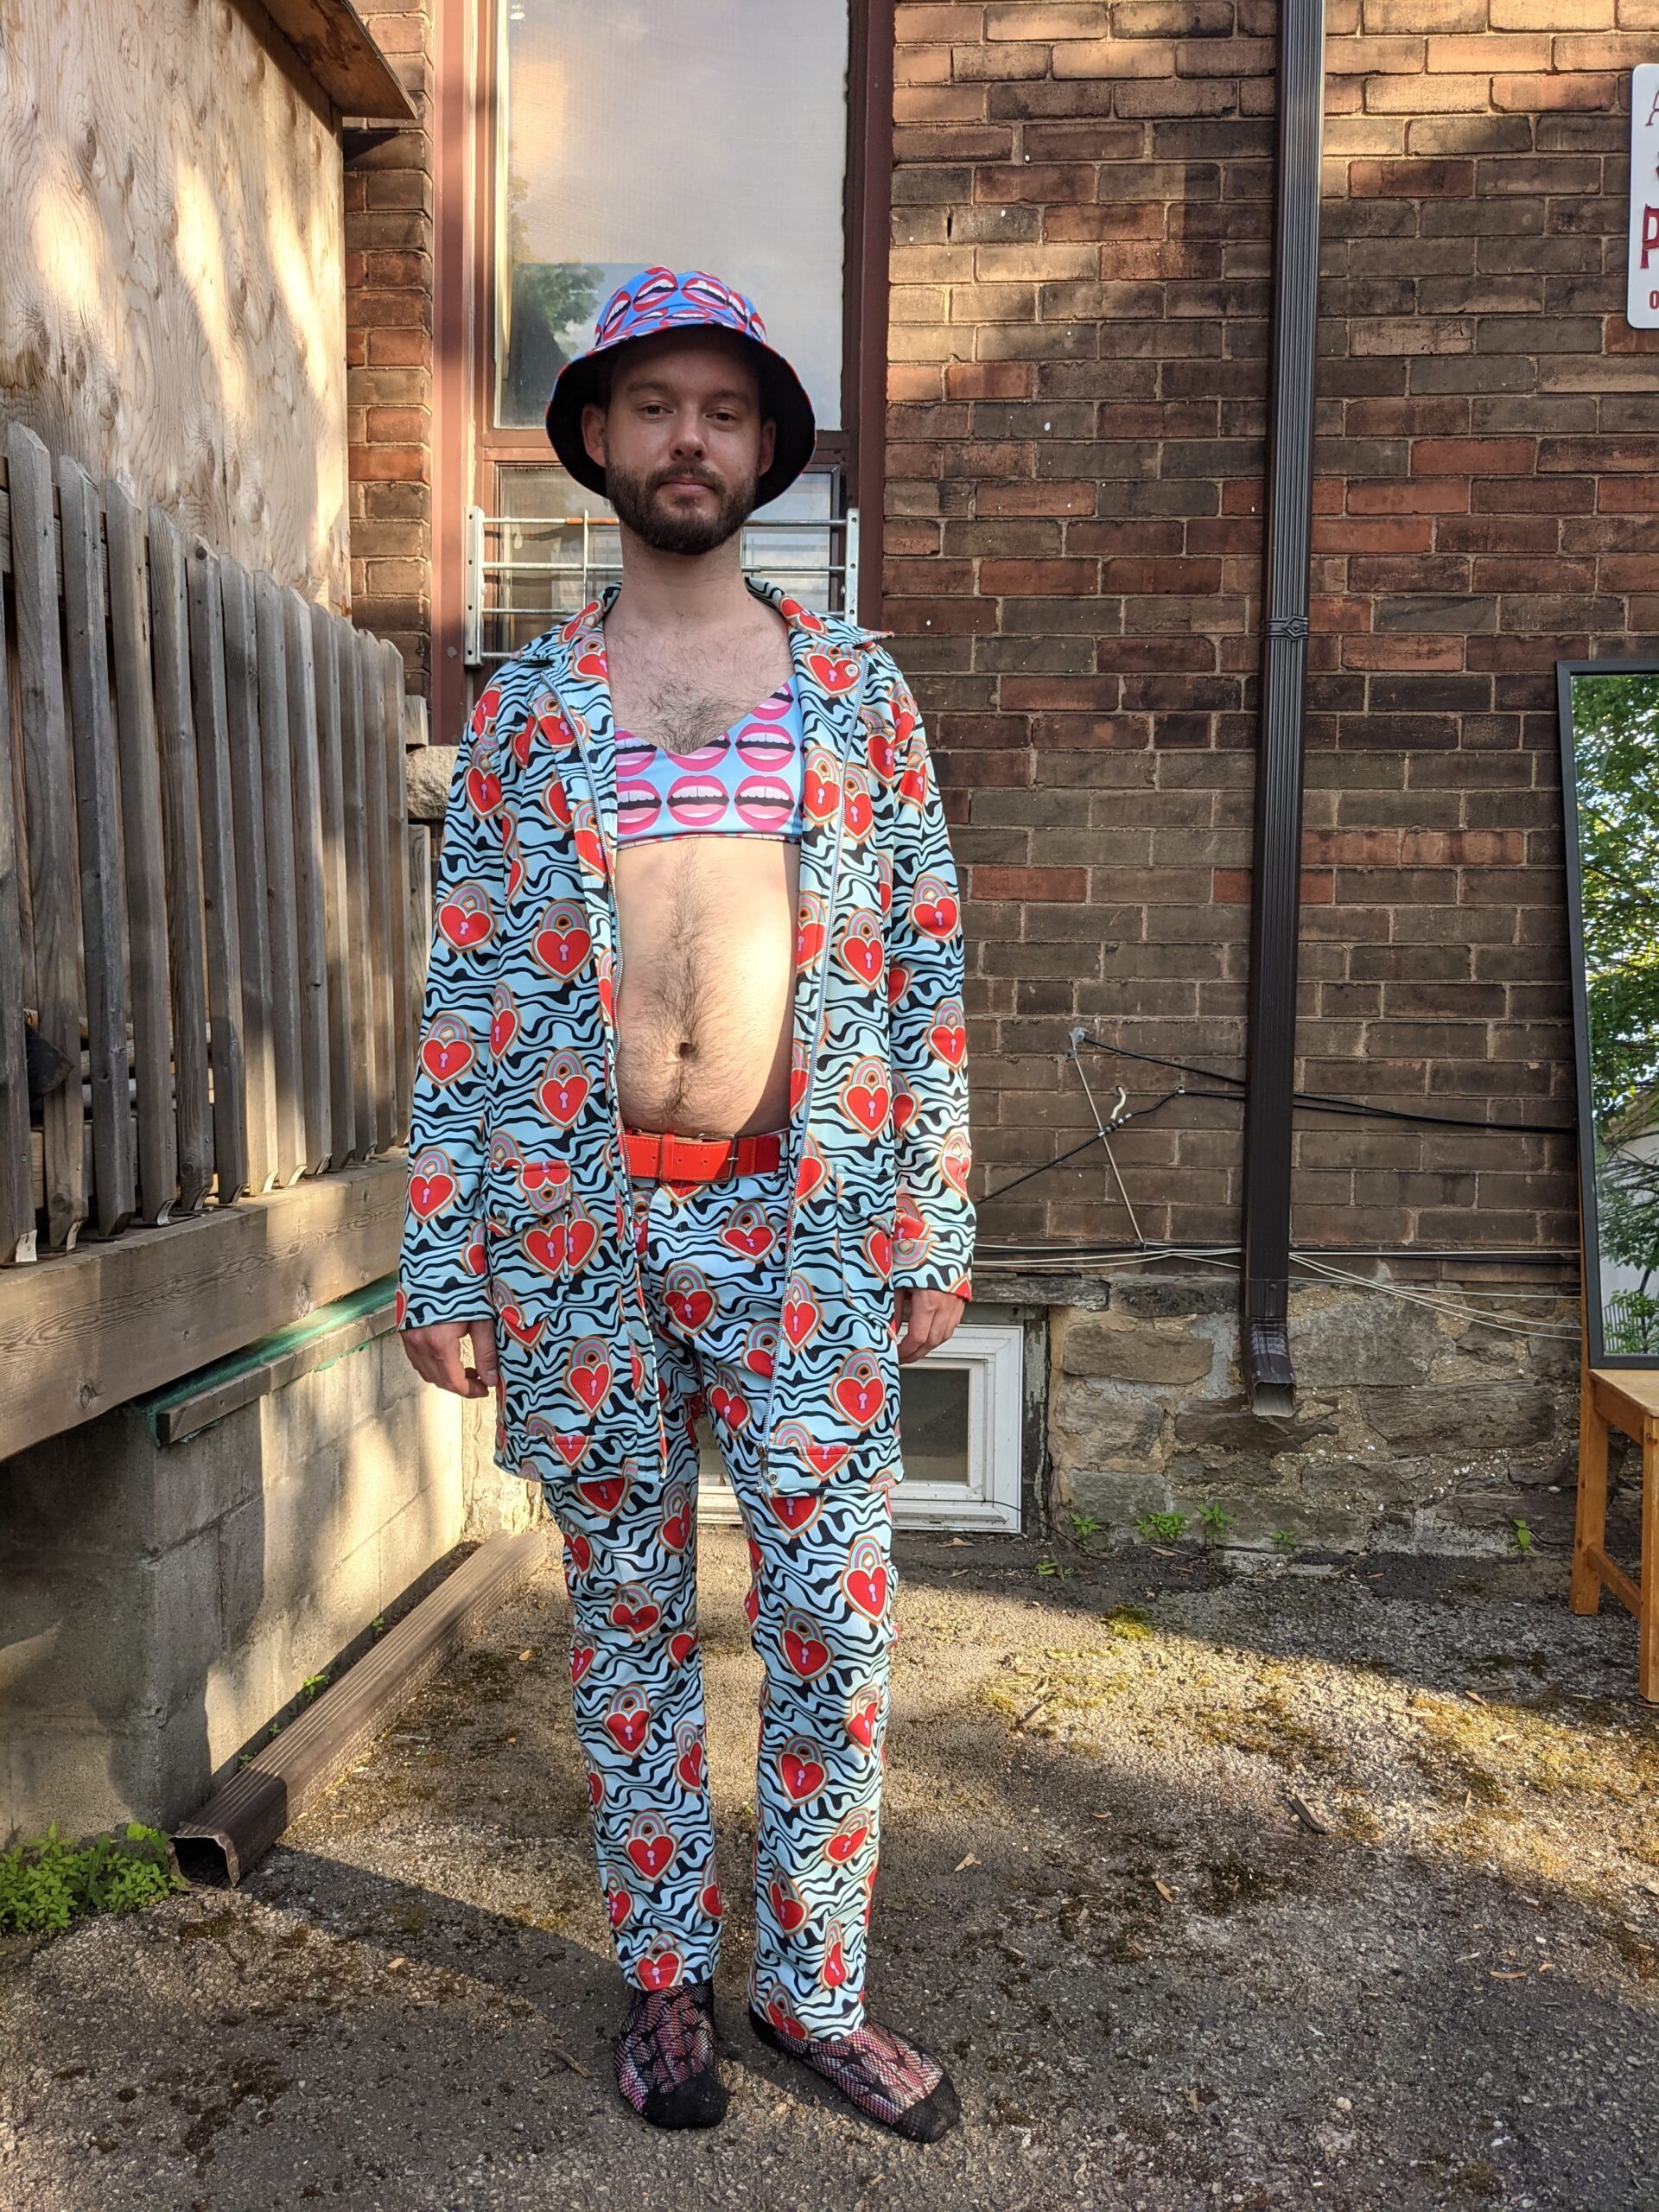 Jordan, a tall thin white gay man with a beard, is standing in a backyard, looking directly at the camera. He is wearing head-to-toe flashy, brightly coloured pop-art print (designed by Hayley Elasaeeser), including a bucket hat and bikini top with a matching mouthy print, and a jacket and pants with matching psychedelic green print. He is in bare feet, standing on pavement with a brick wall behind him.